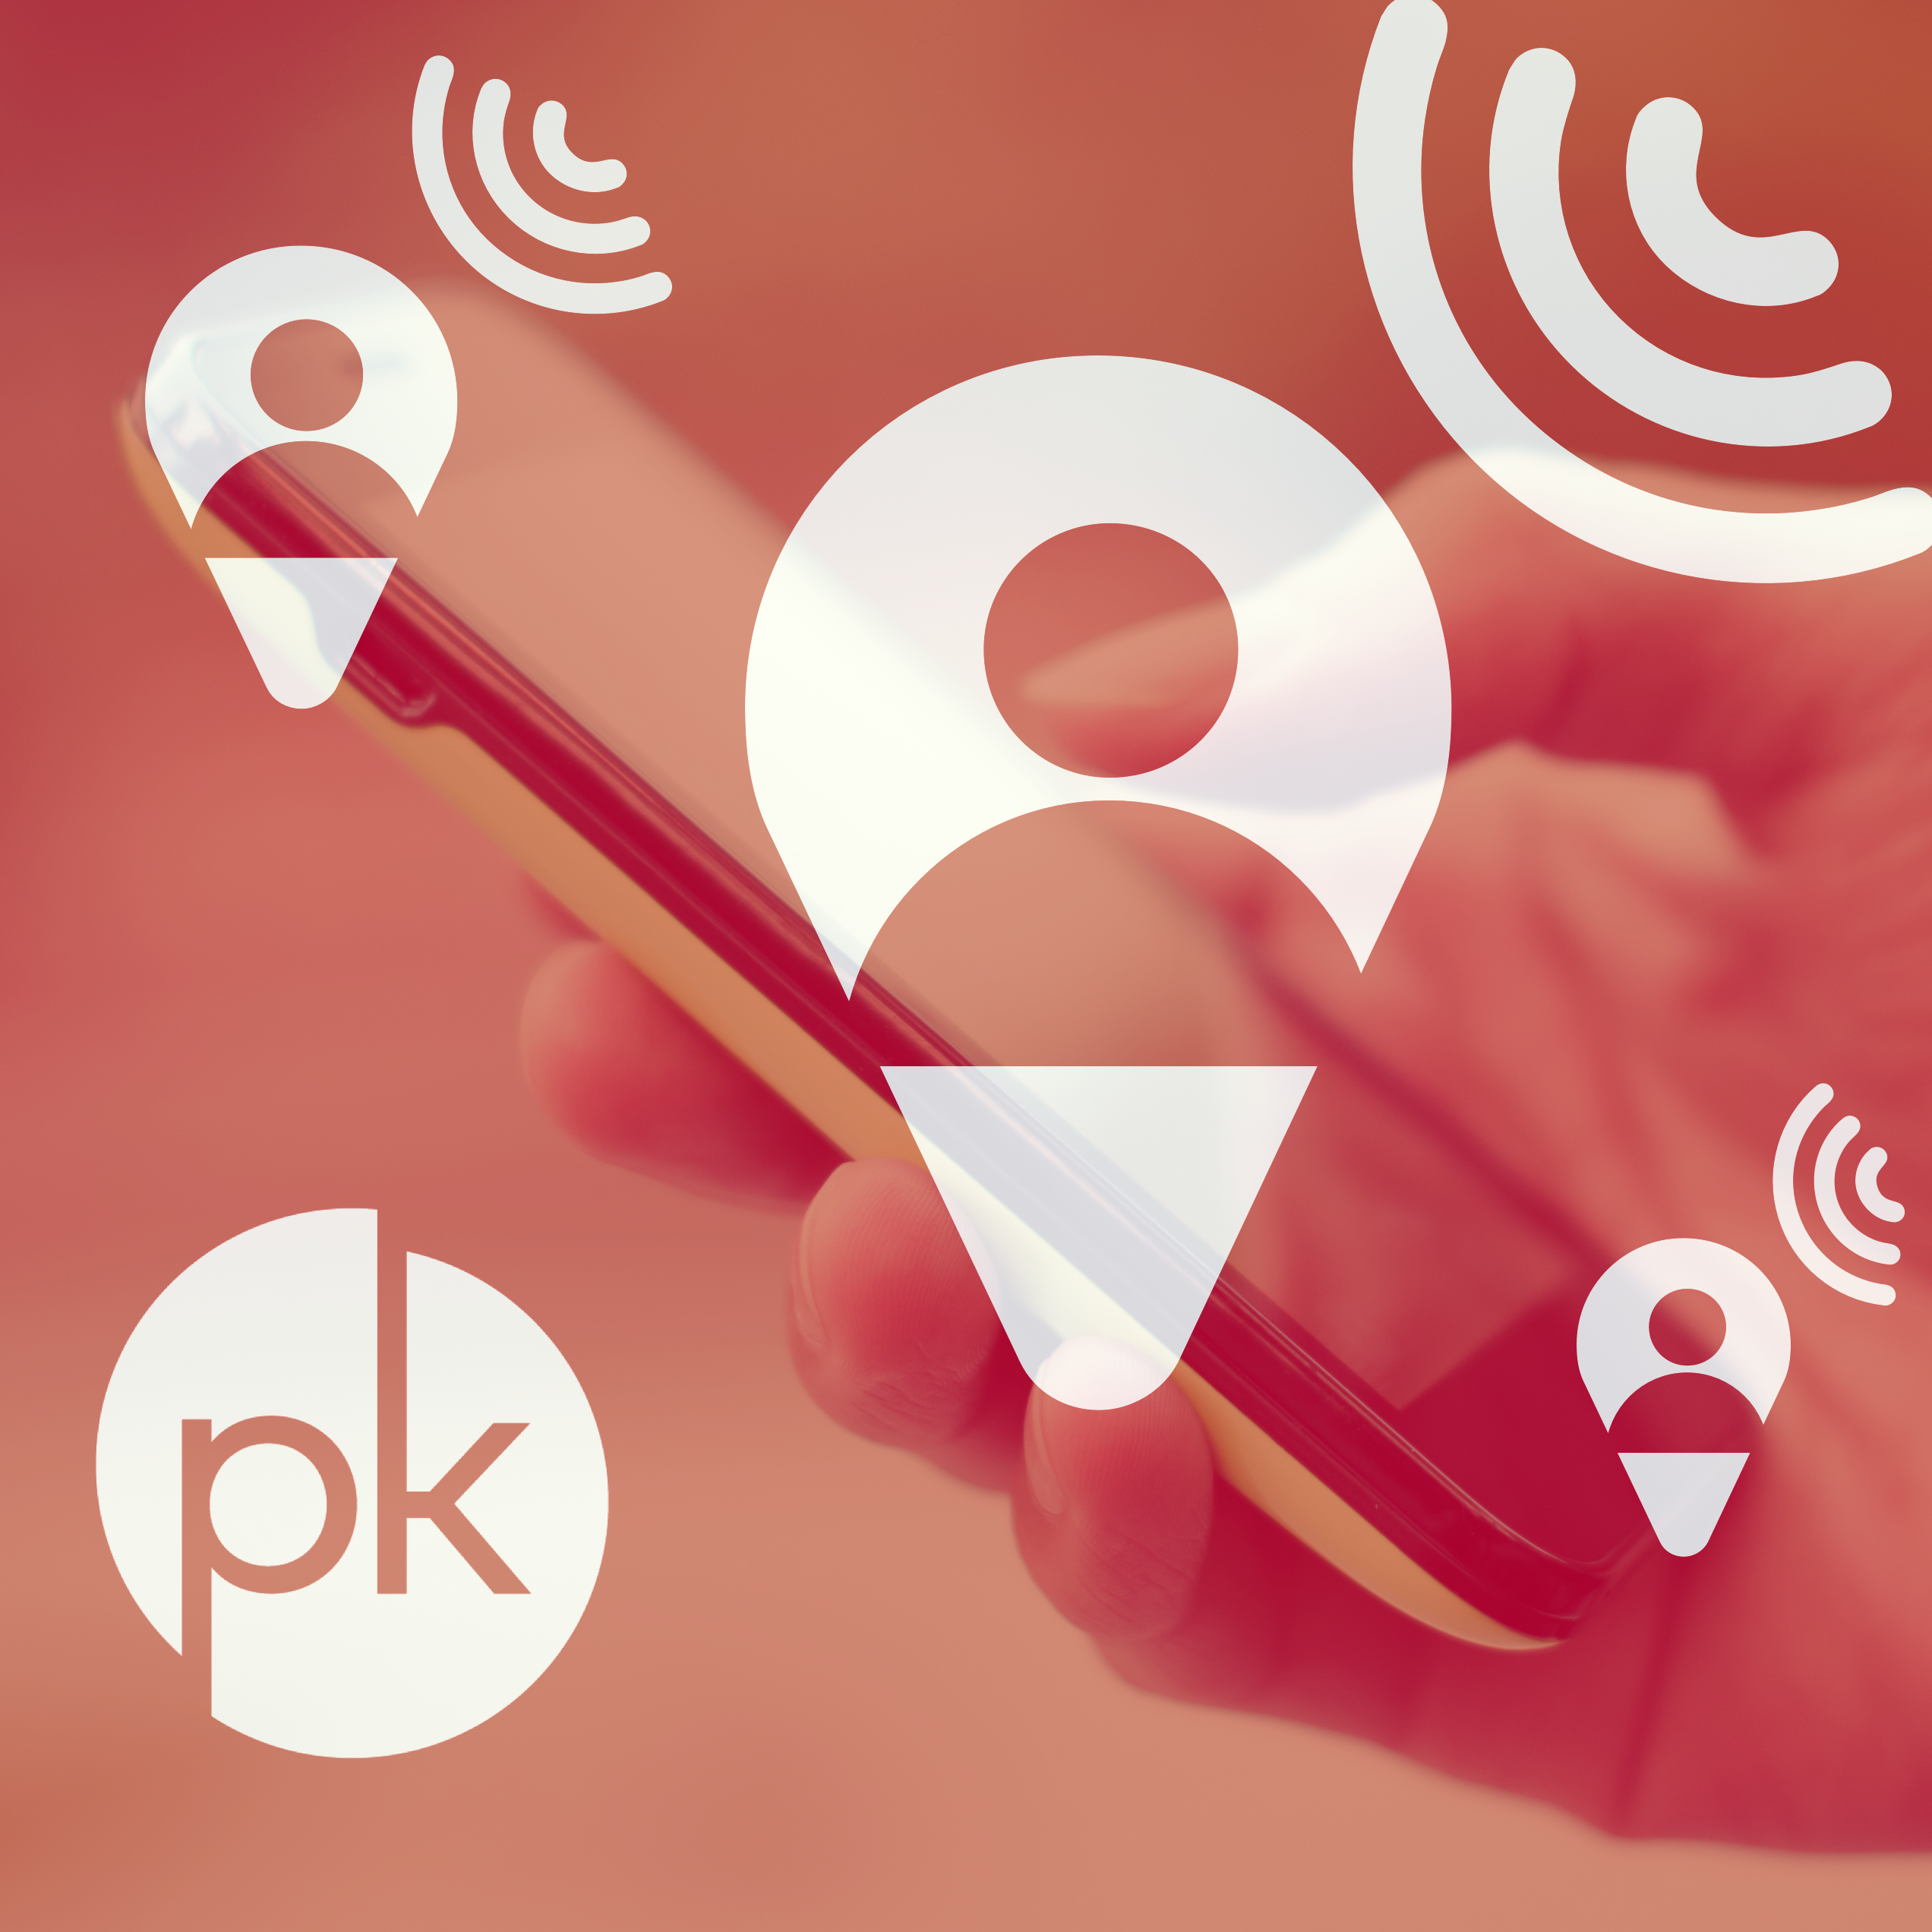 PKontact: An app for anonymous, real-time contact tracing